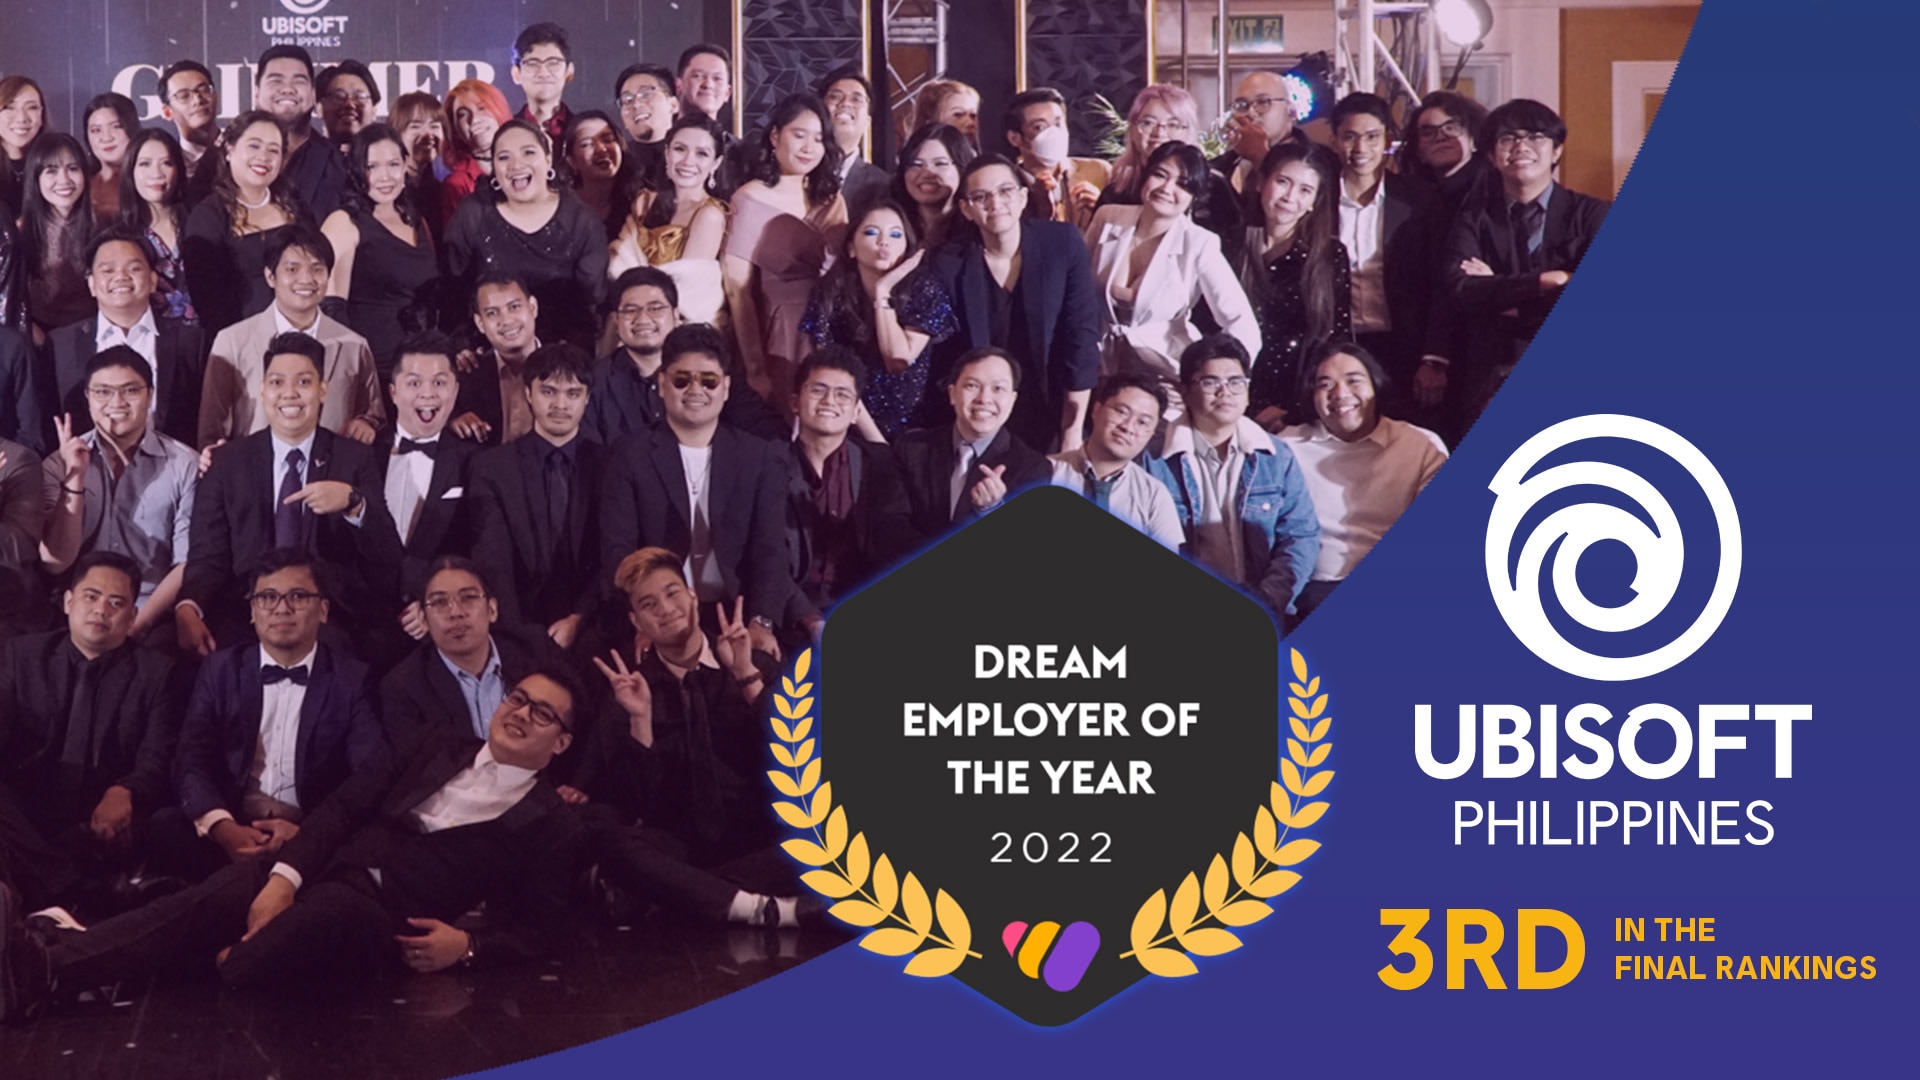 Ubisoft Philippines among Dream Employer of the Year Finalists